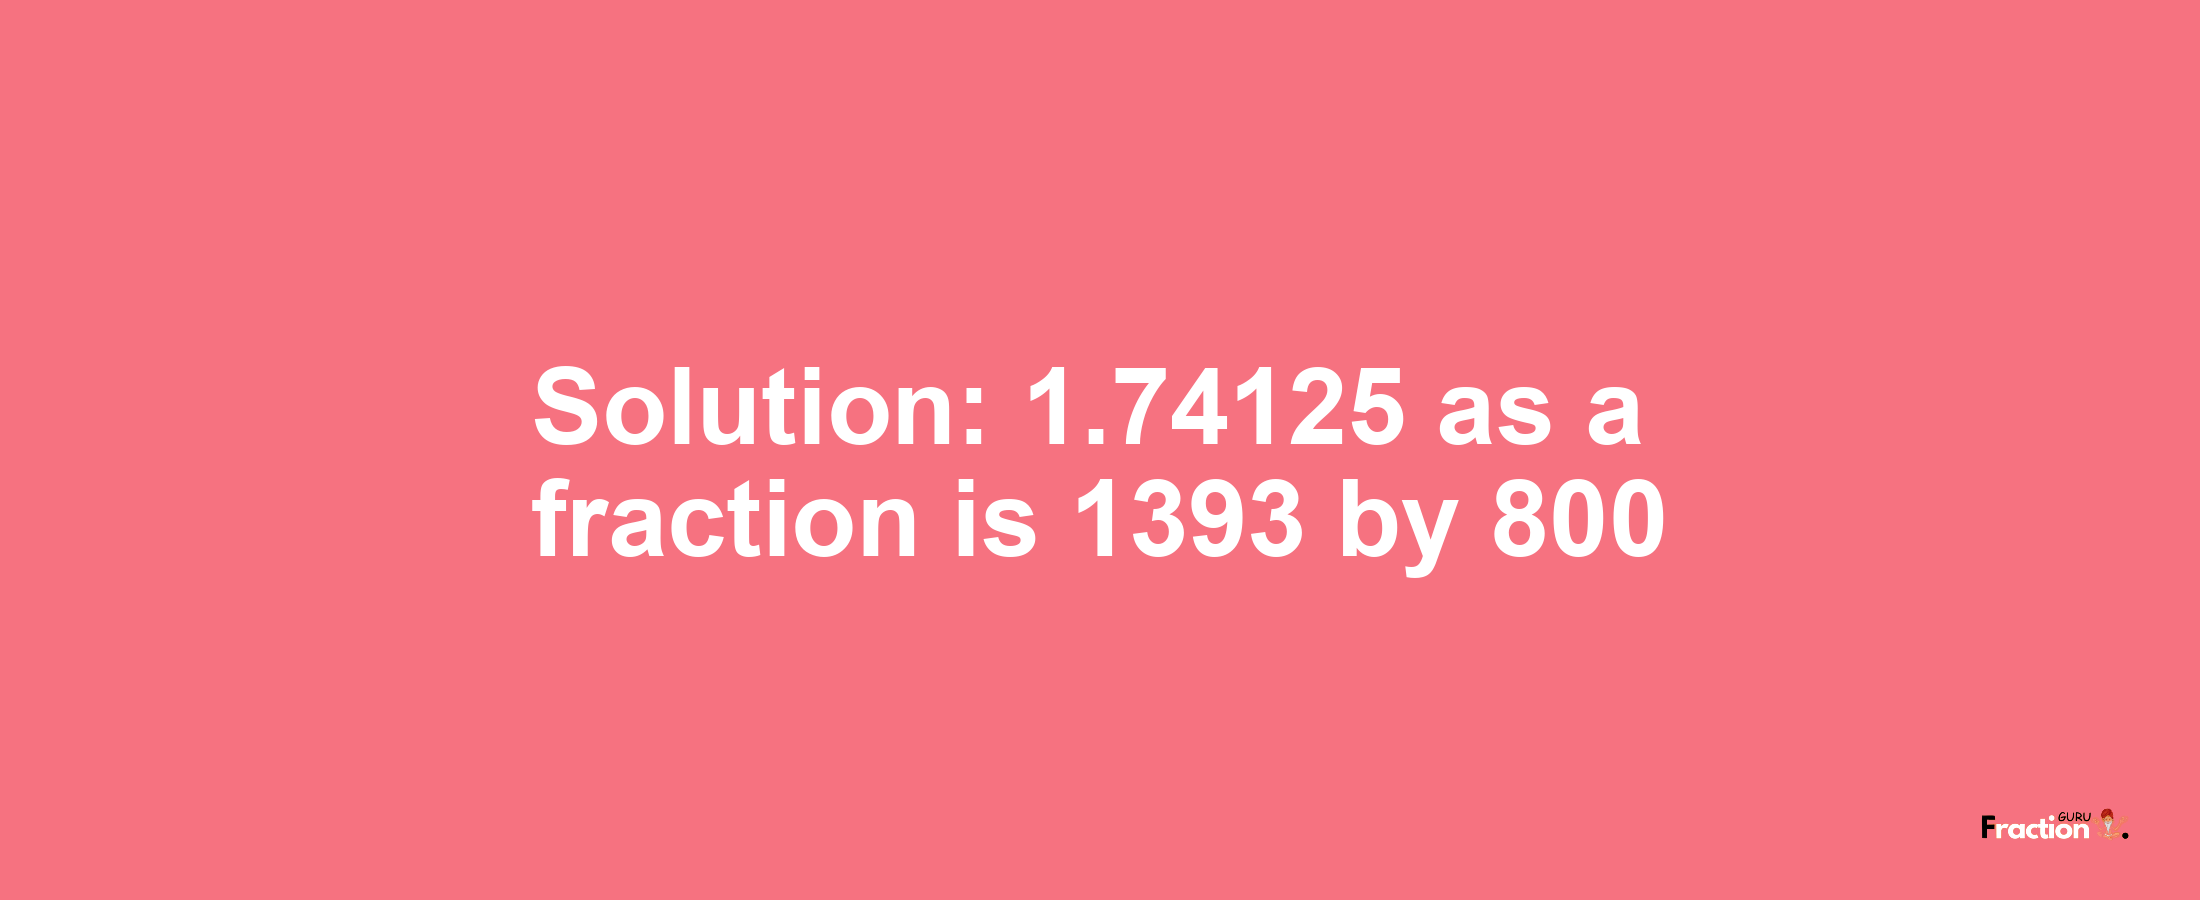 Solution:1.74125 as a fraction is 1393/800